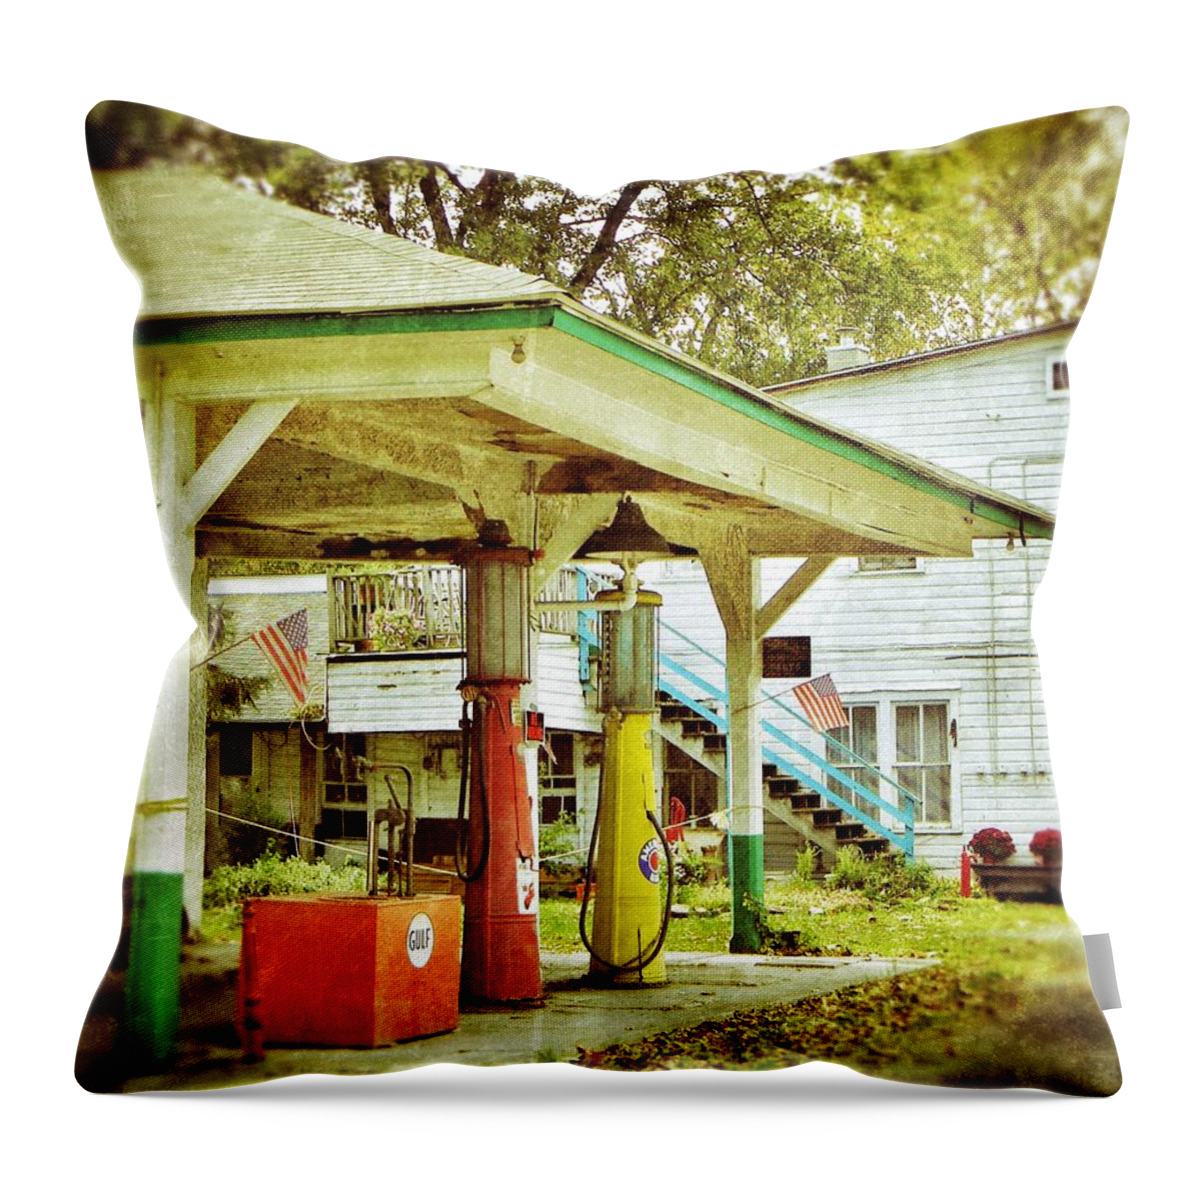 Visible Gas Pumps Throw Pillow featuring the photograph Visible Gas Pumps by Jean Goodwin Brooks